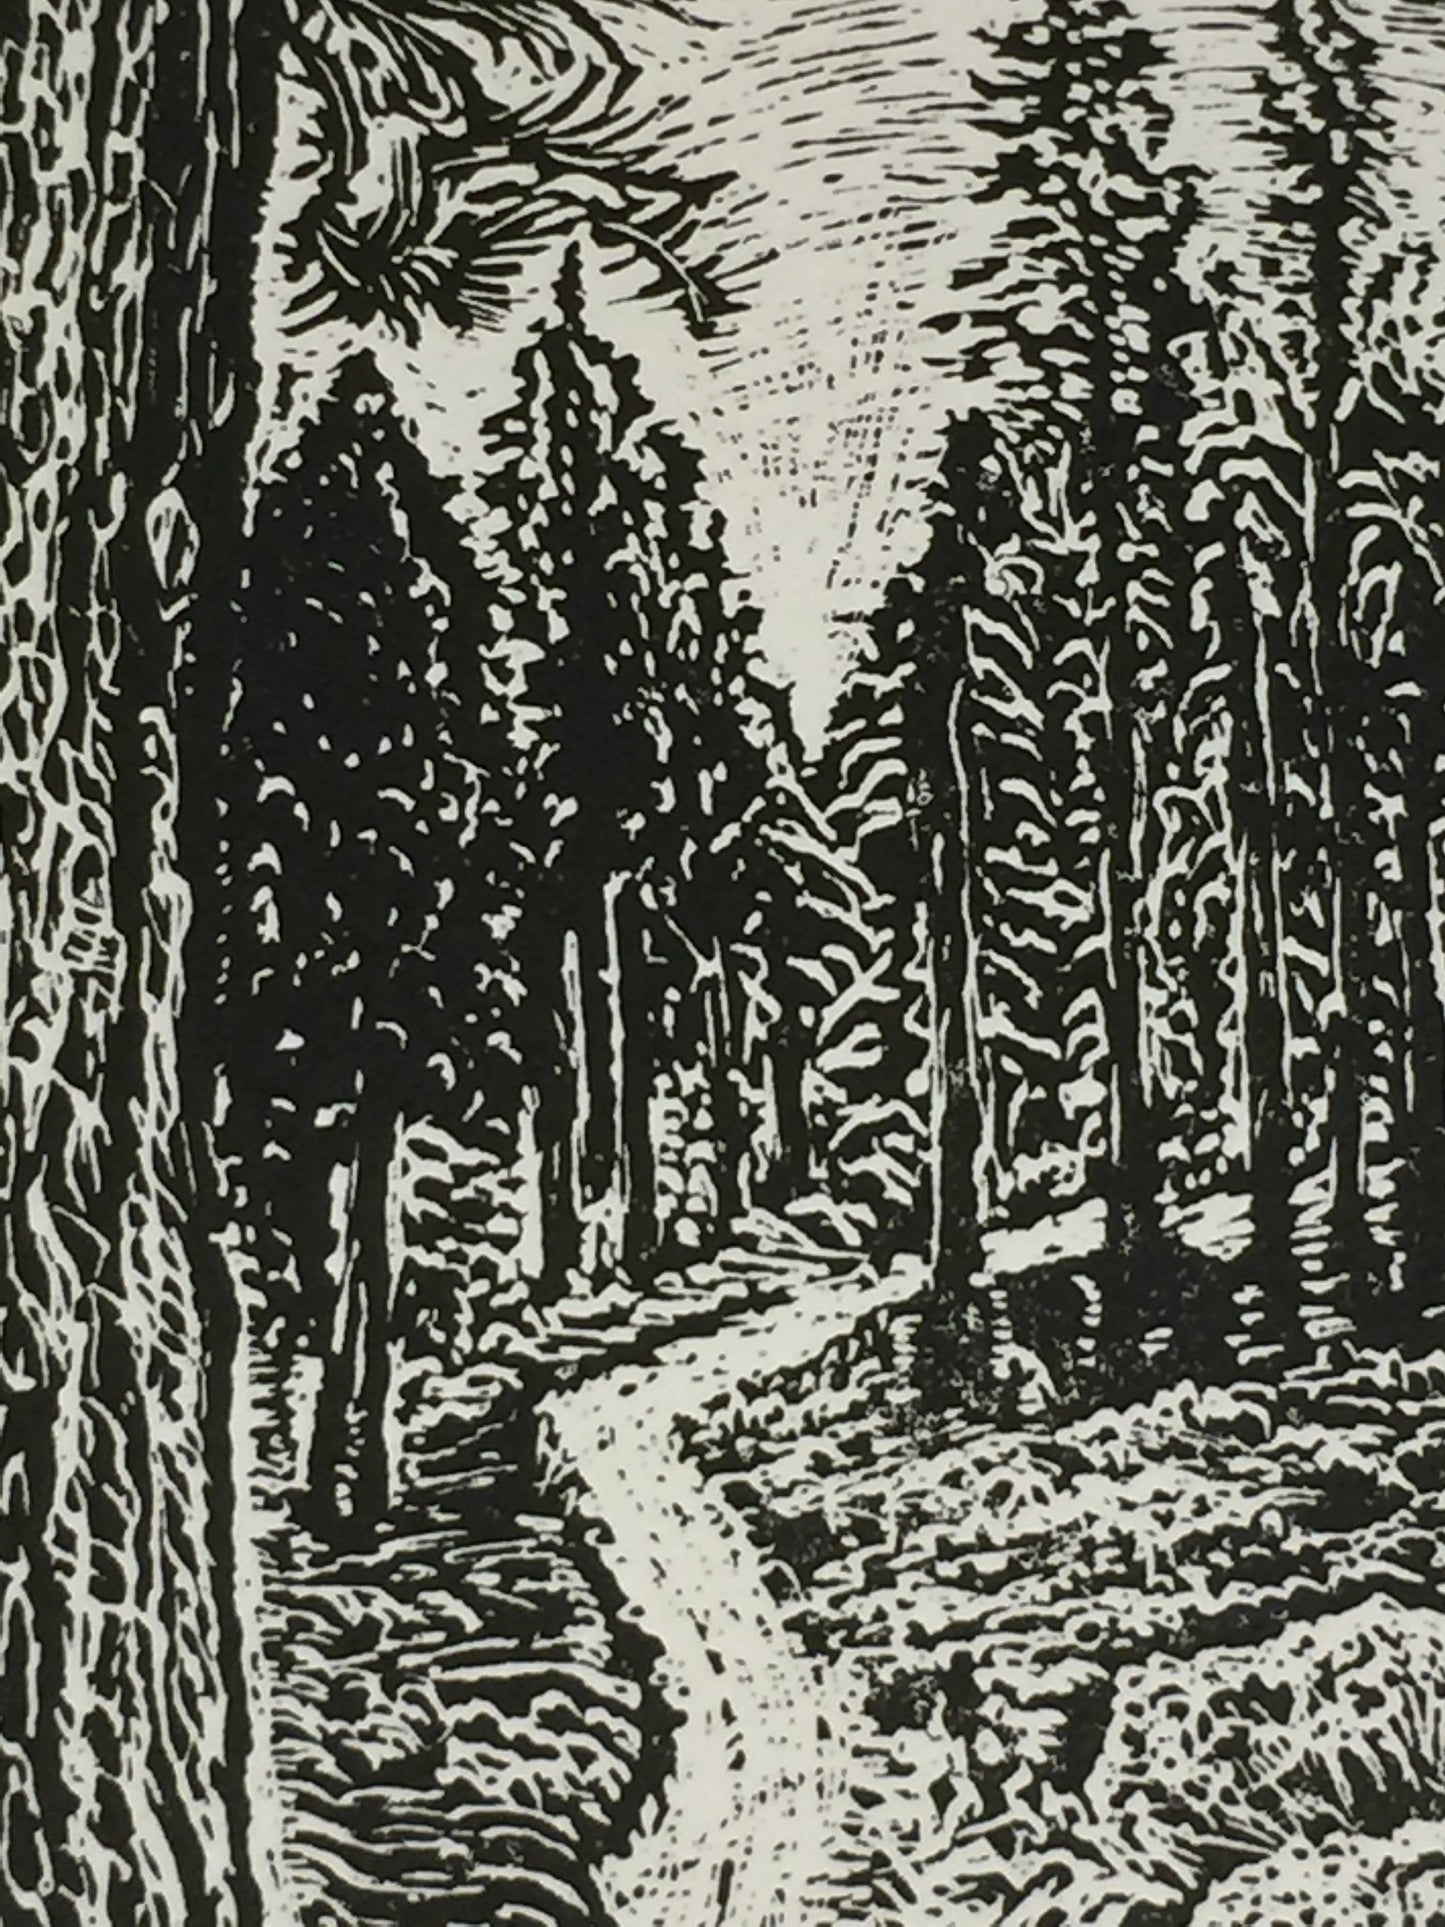 Original Wood Engraving Natures Peace Mountain Sunny Trail Among Pine Trees